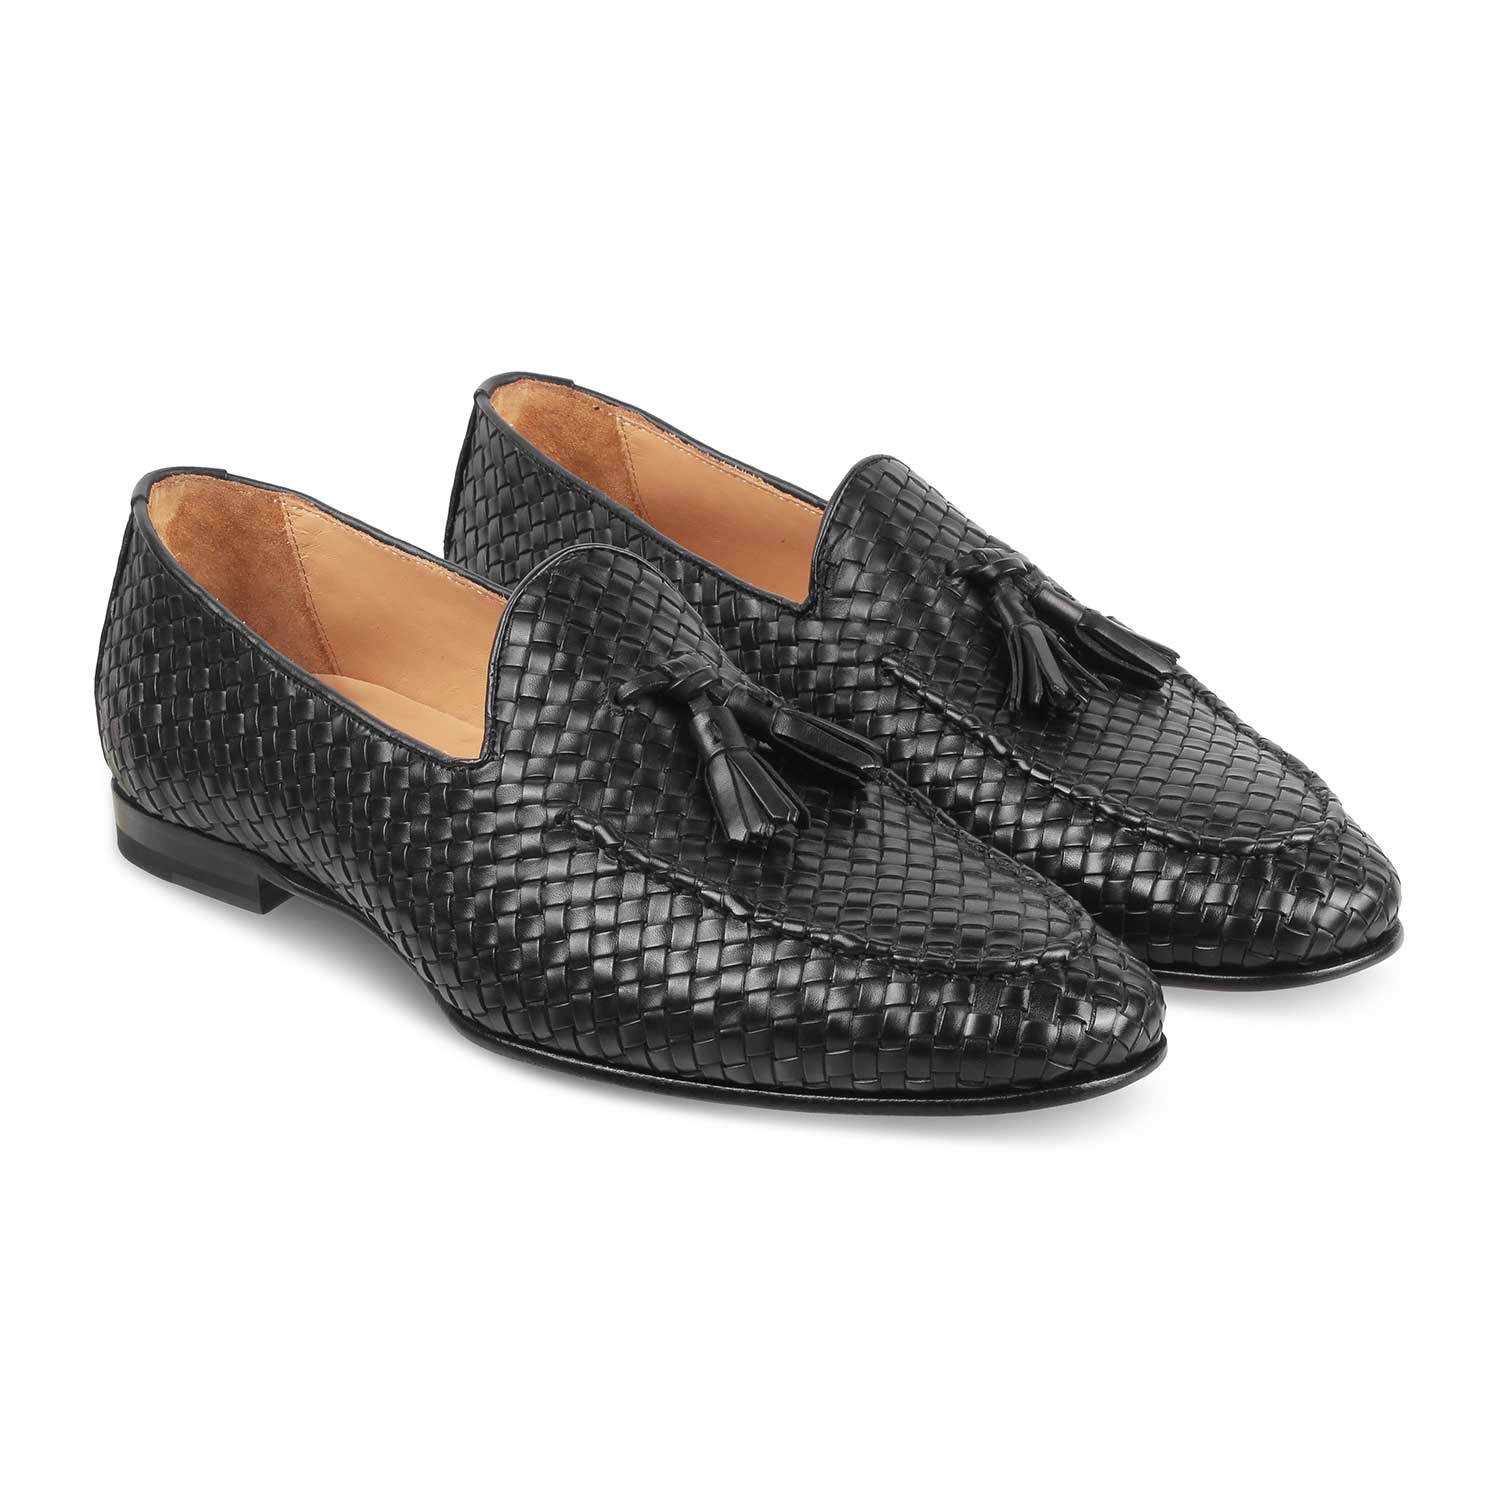 Tresmode-The Brucato Black Men's Handcrafted Leather Loafers Tresmode-Tresmode